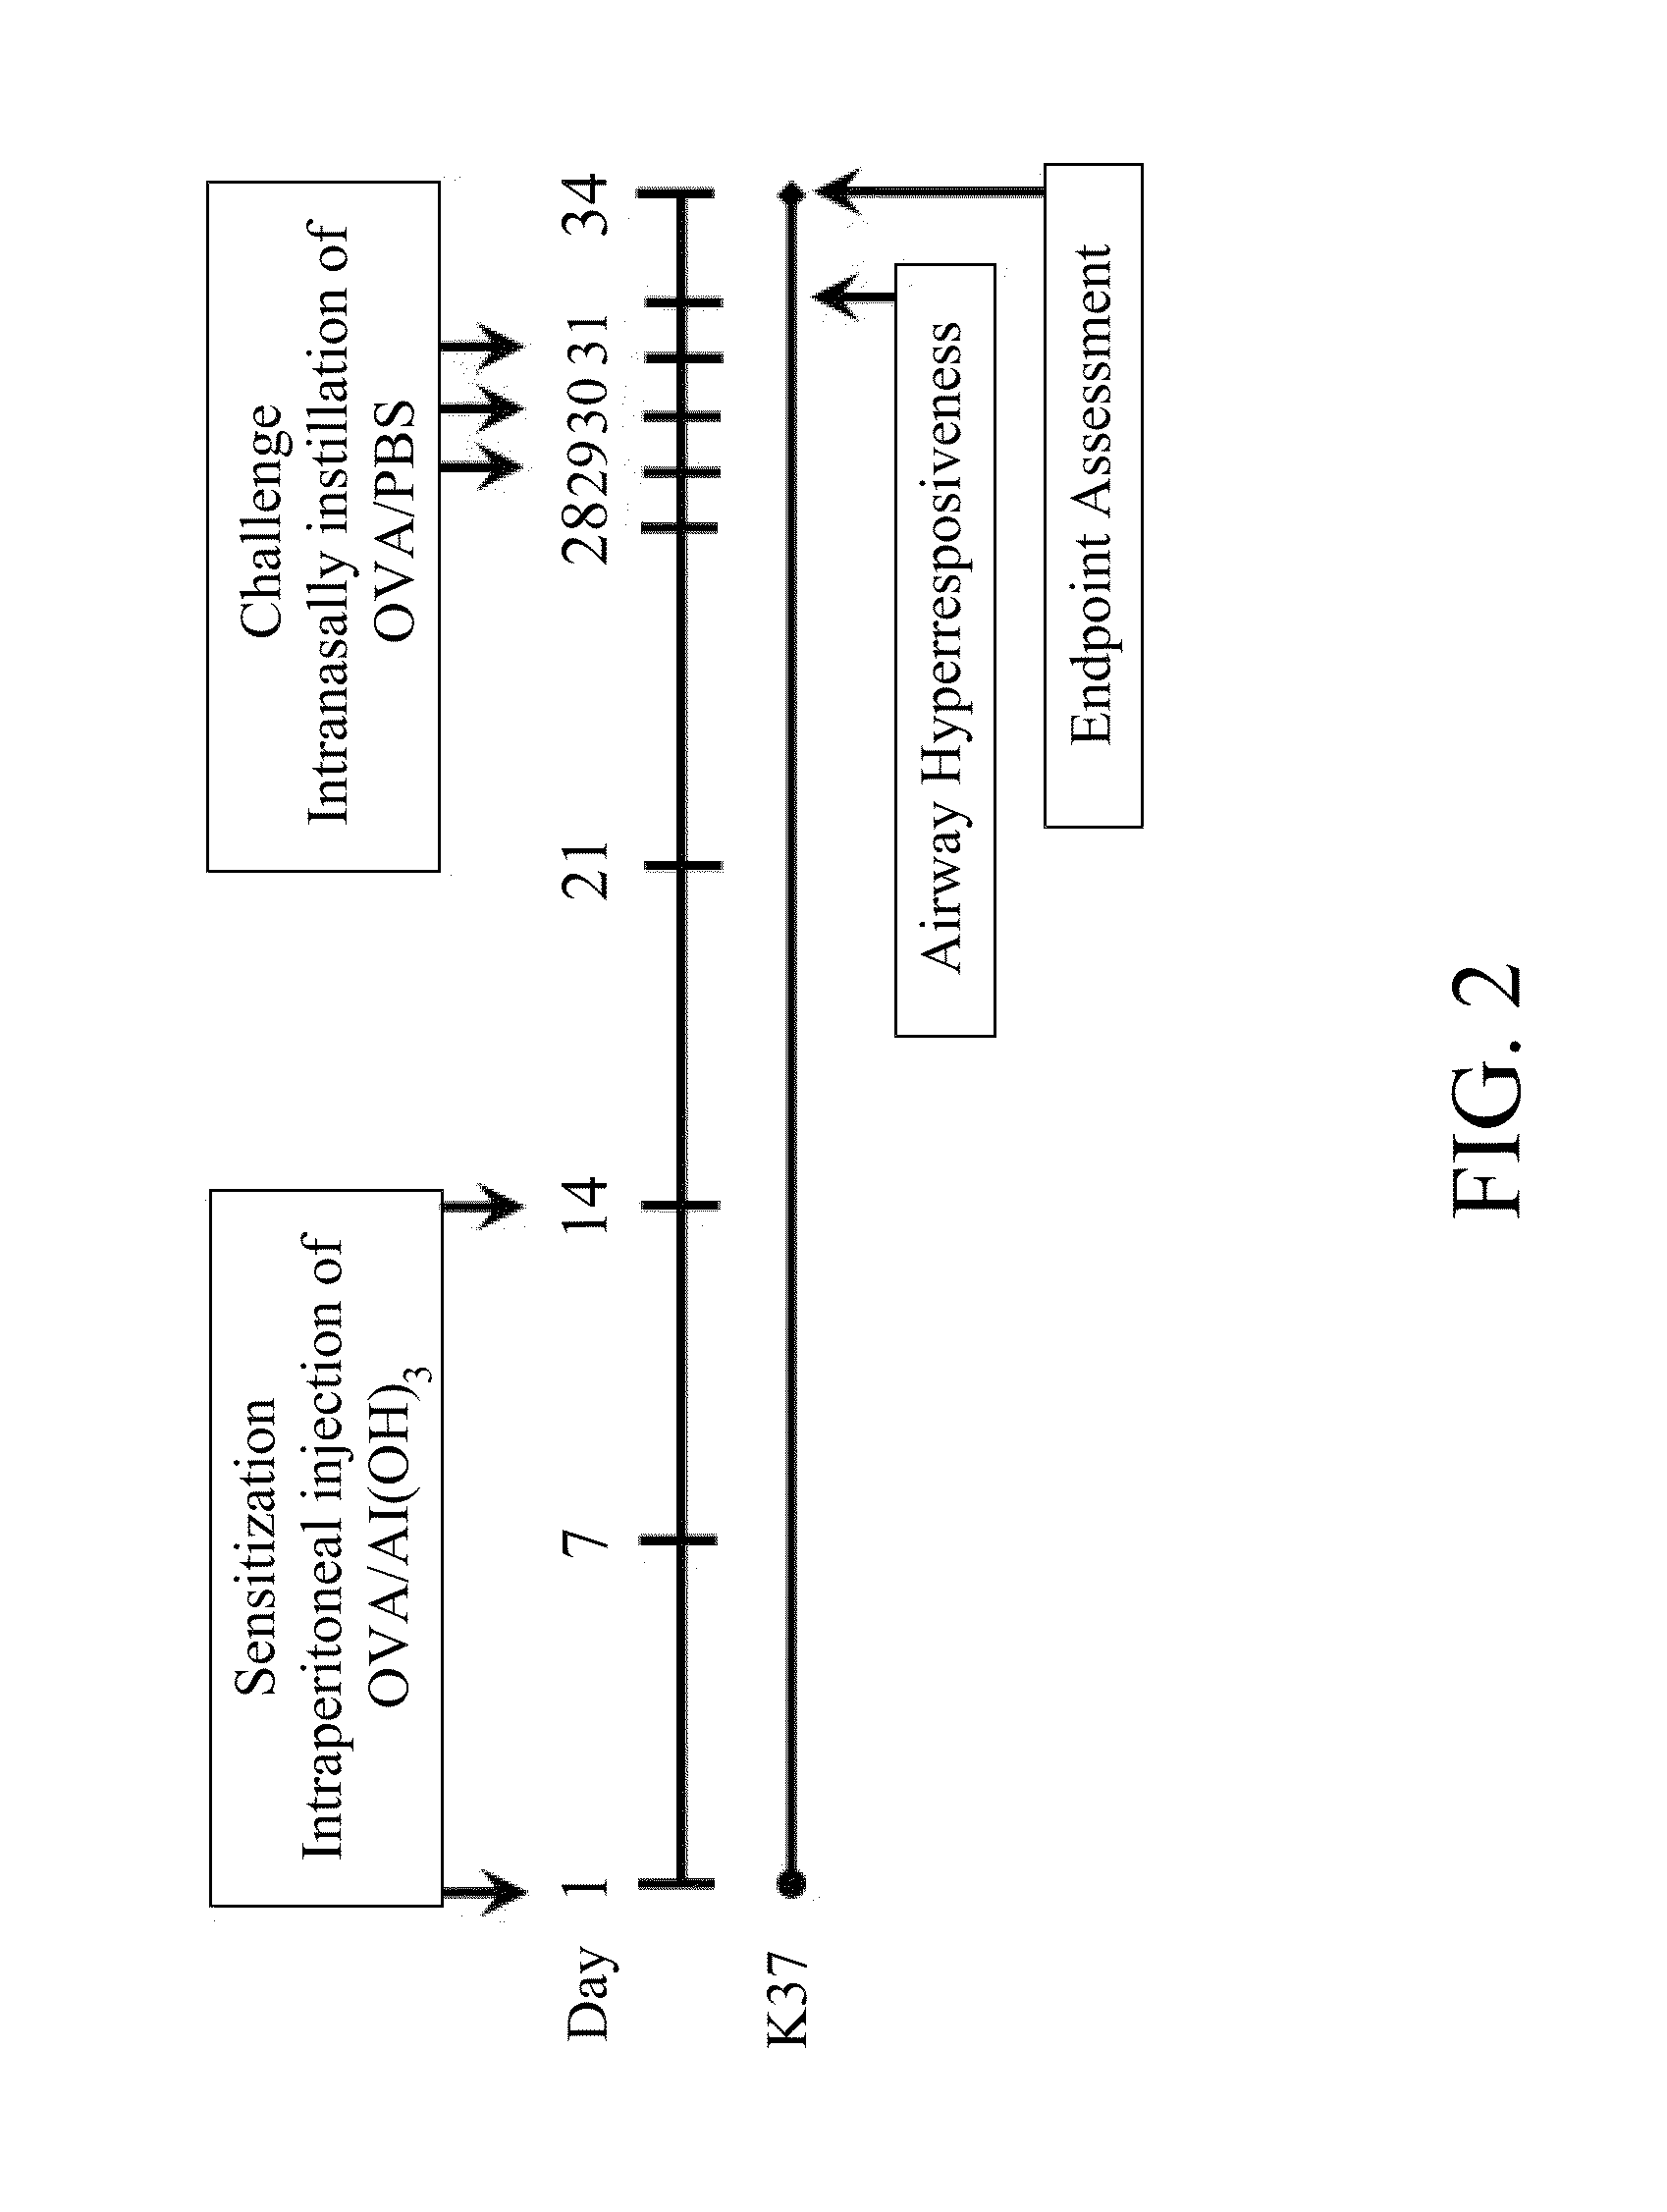 Lactic acid bacterium having immunomodulatory and Anti-allergic effects and pharmaceutical composition containing the same